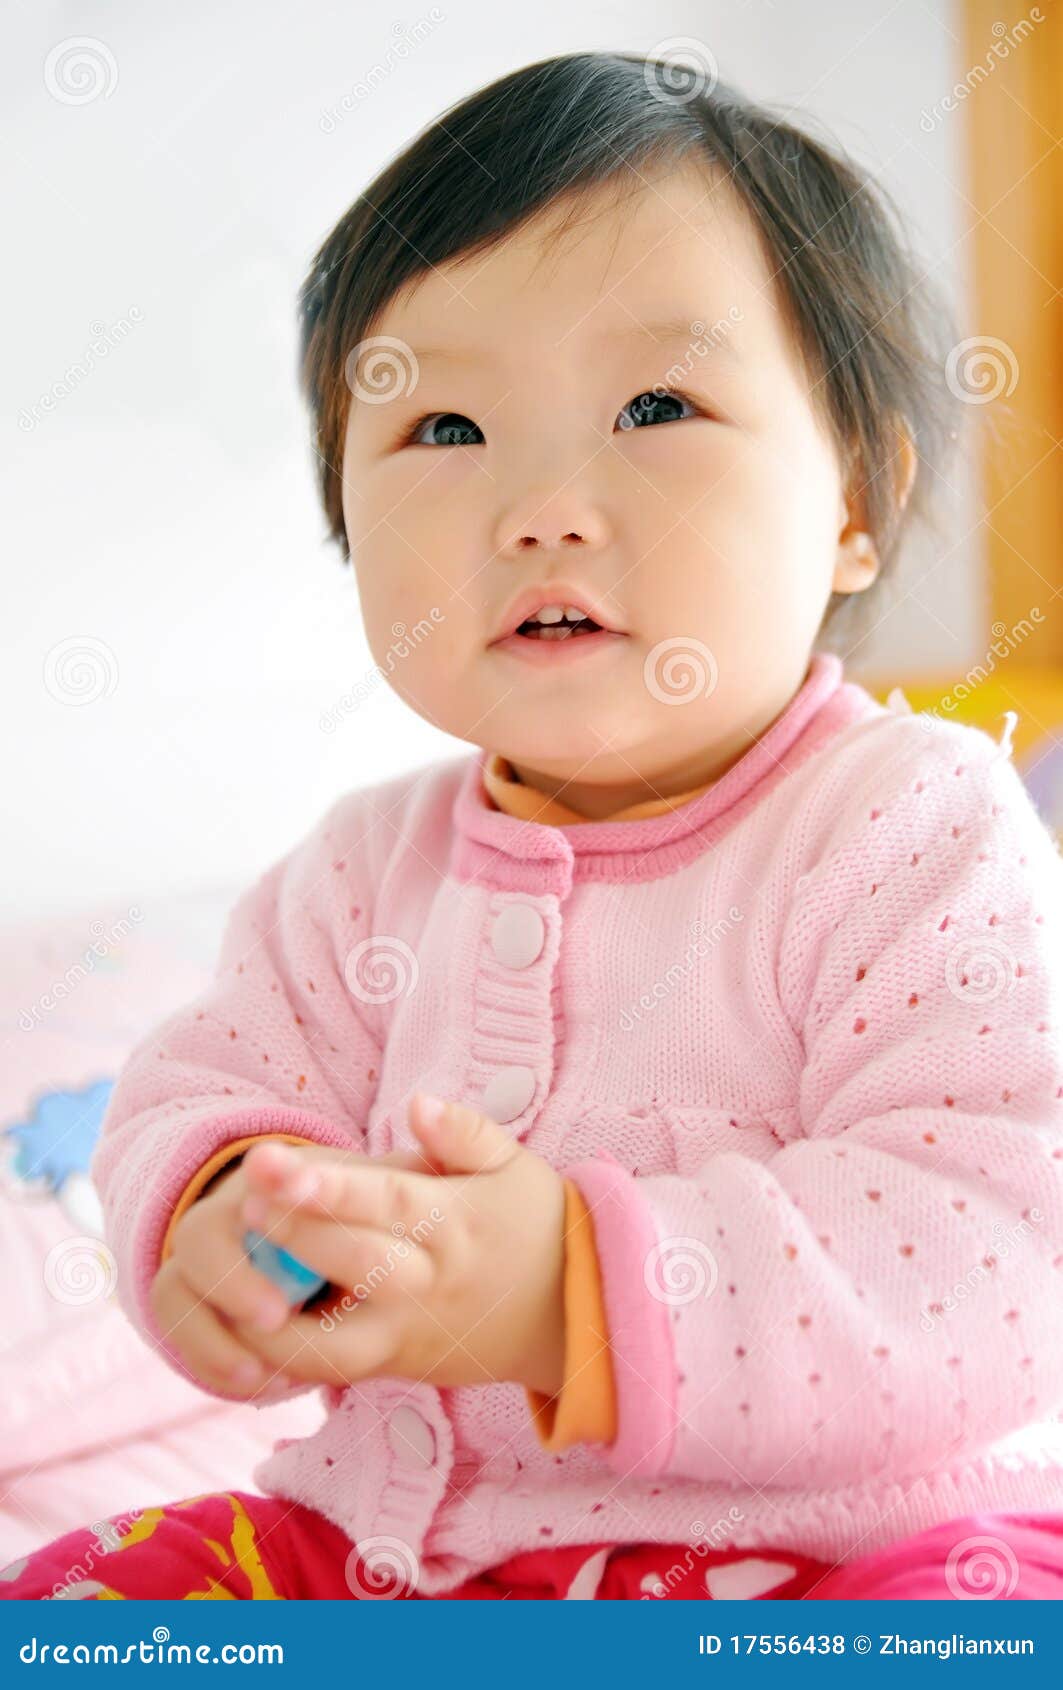 A Asian Baby Girl Royalty Free Sto